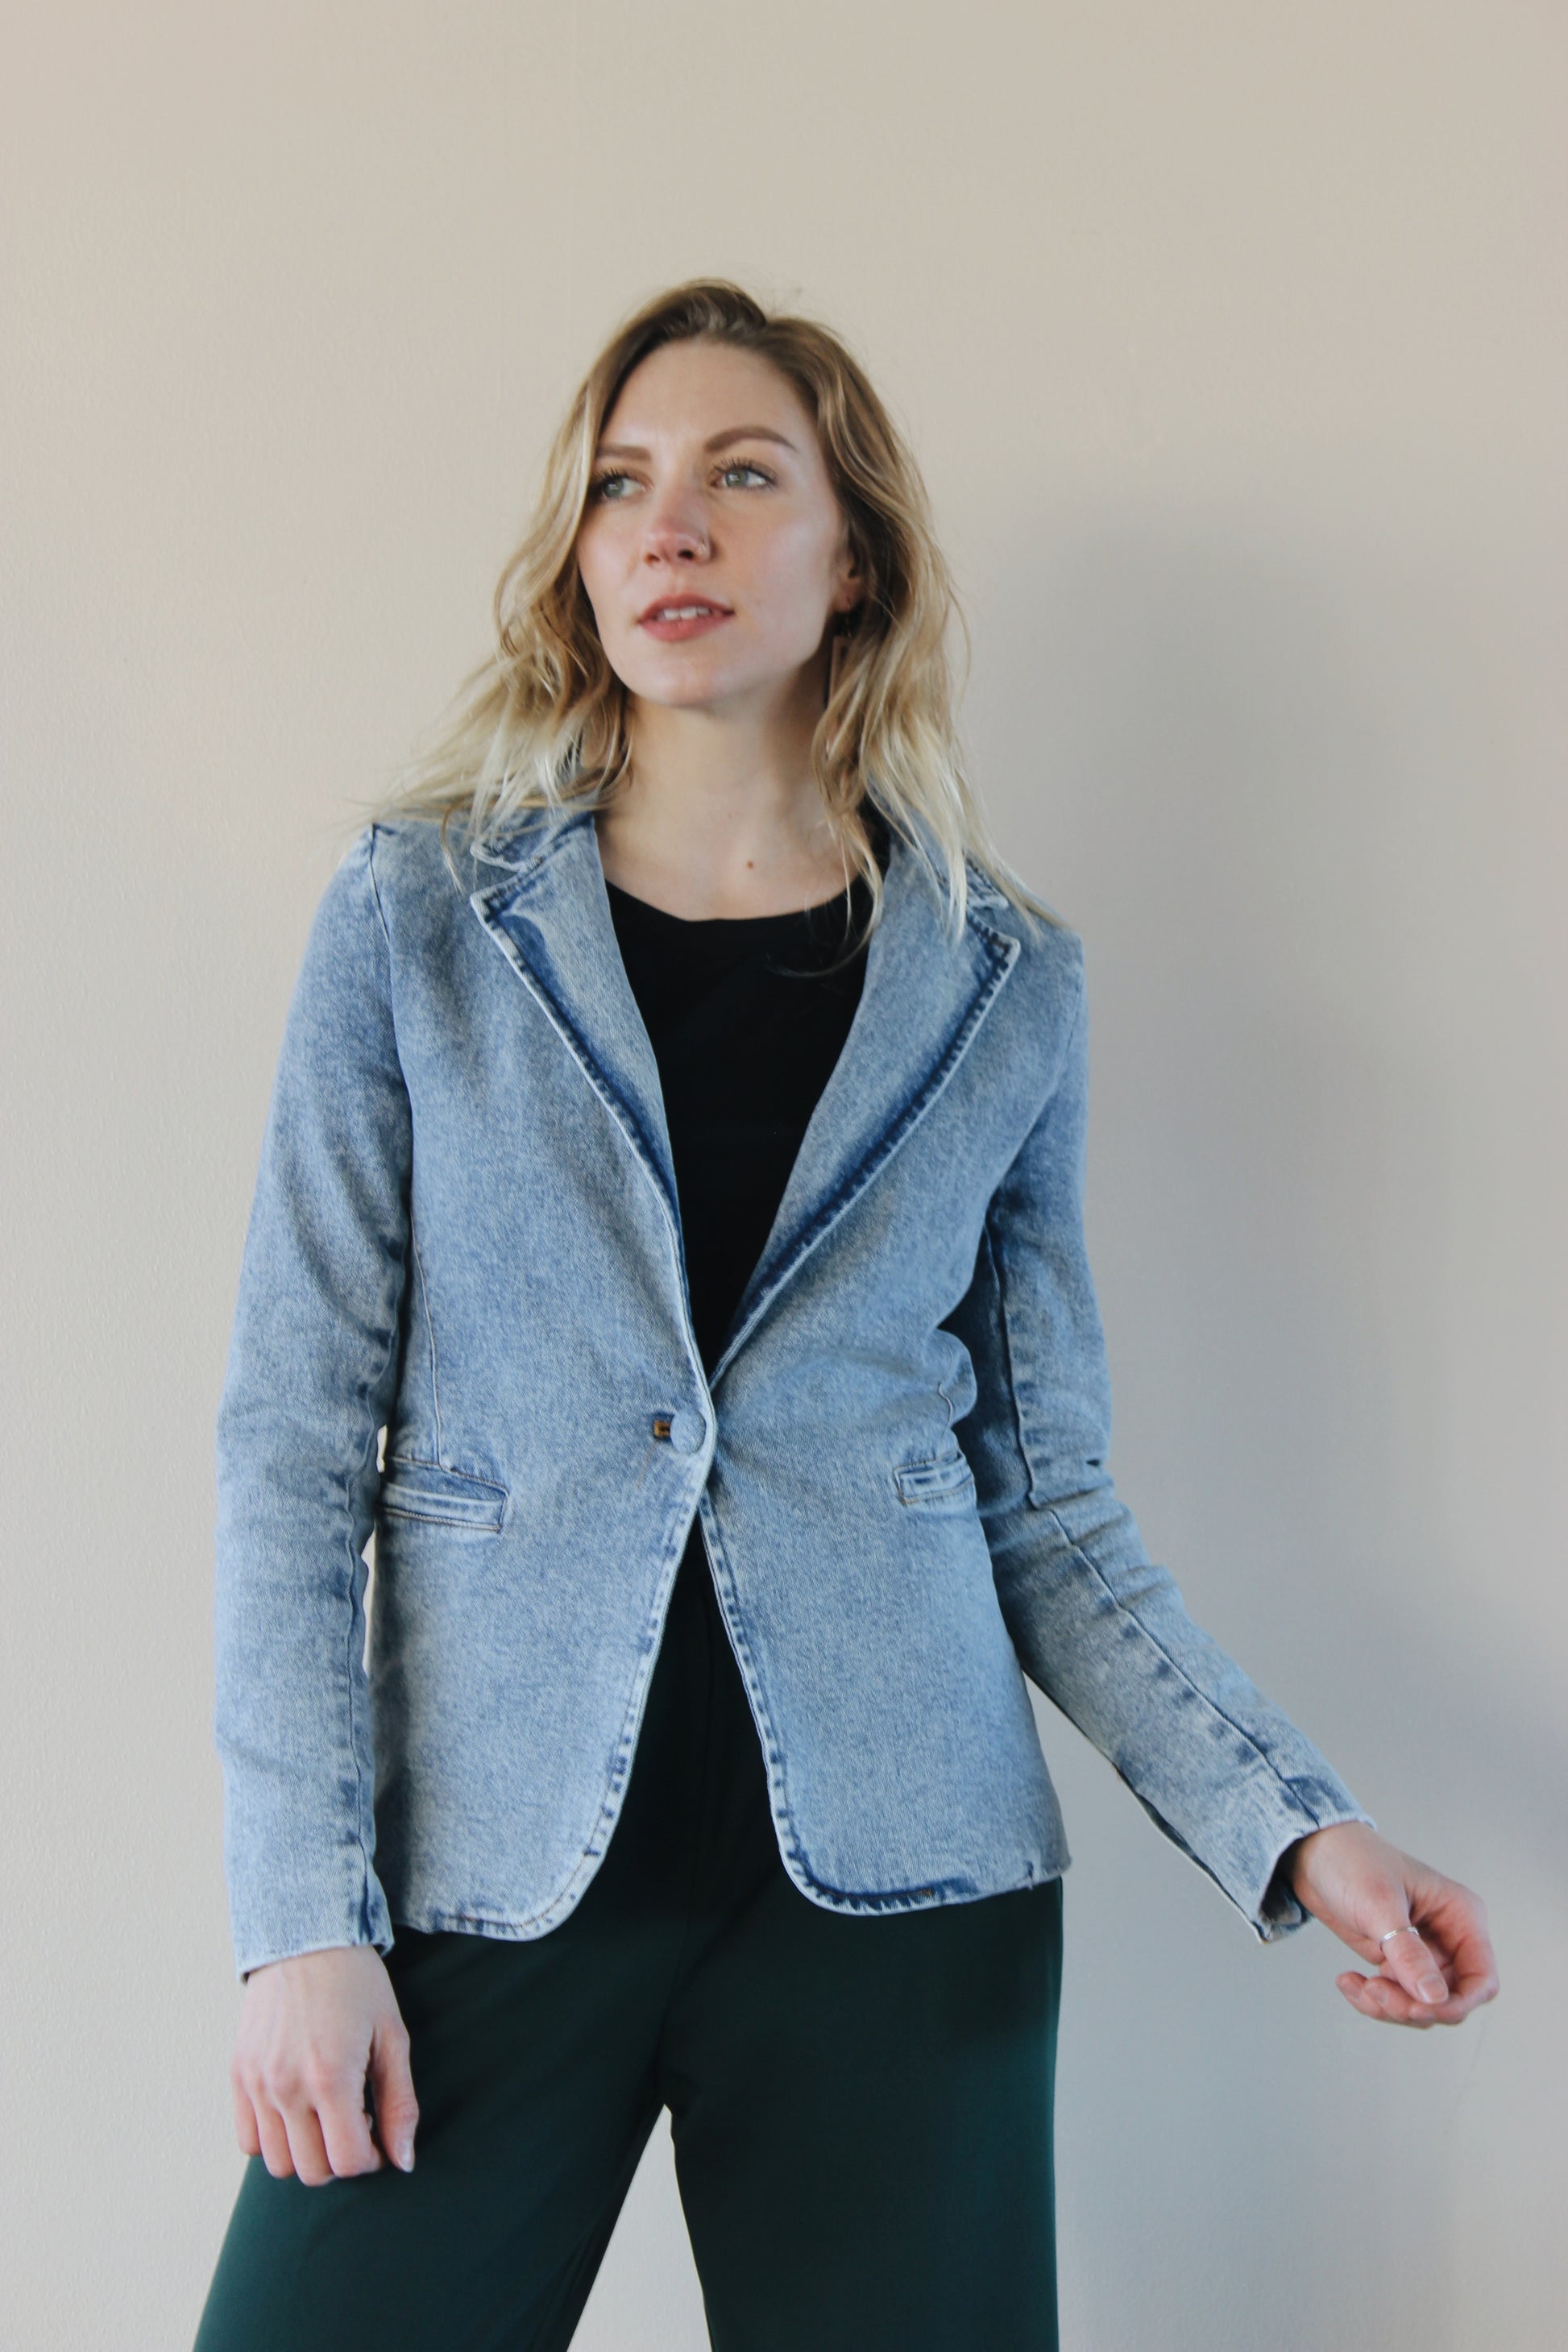 fitted light to medium wash blazer with one denim button enclosure and front pockets that open on the top. slit in back 